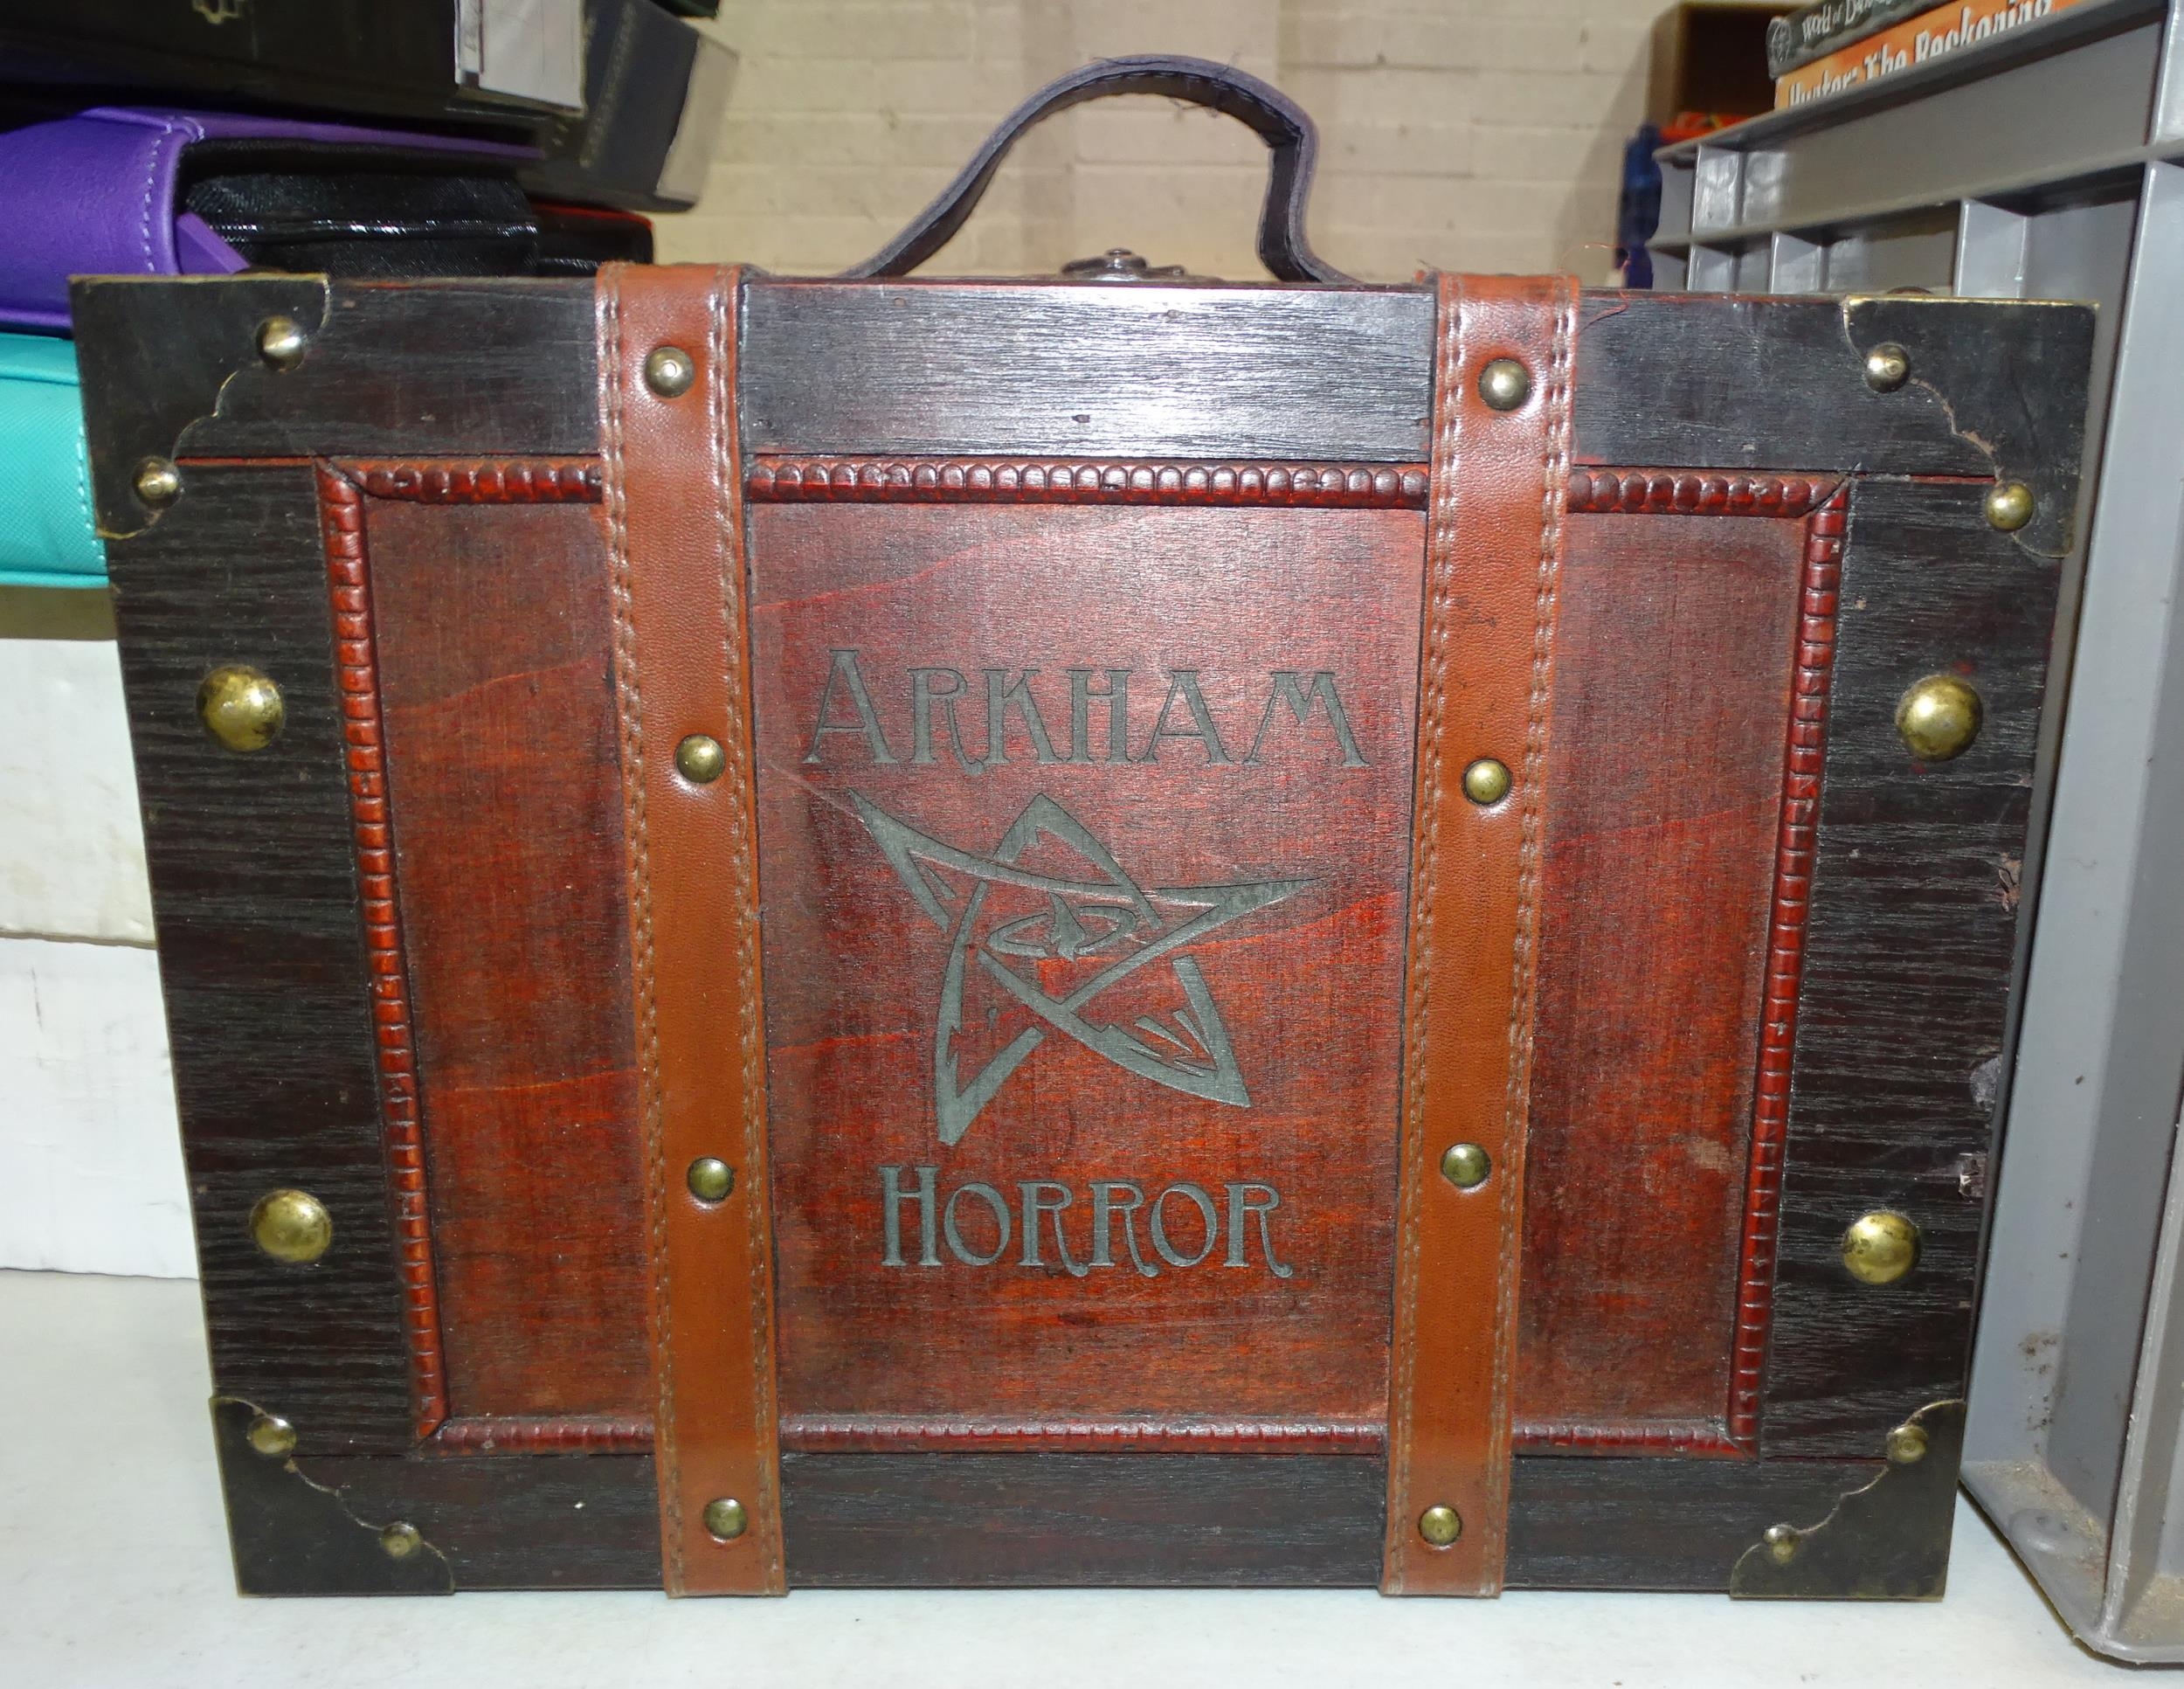 A large collection of 'Arkham Horror' game cards contained in an 'Arkham Horror' suitcase and '